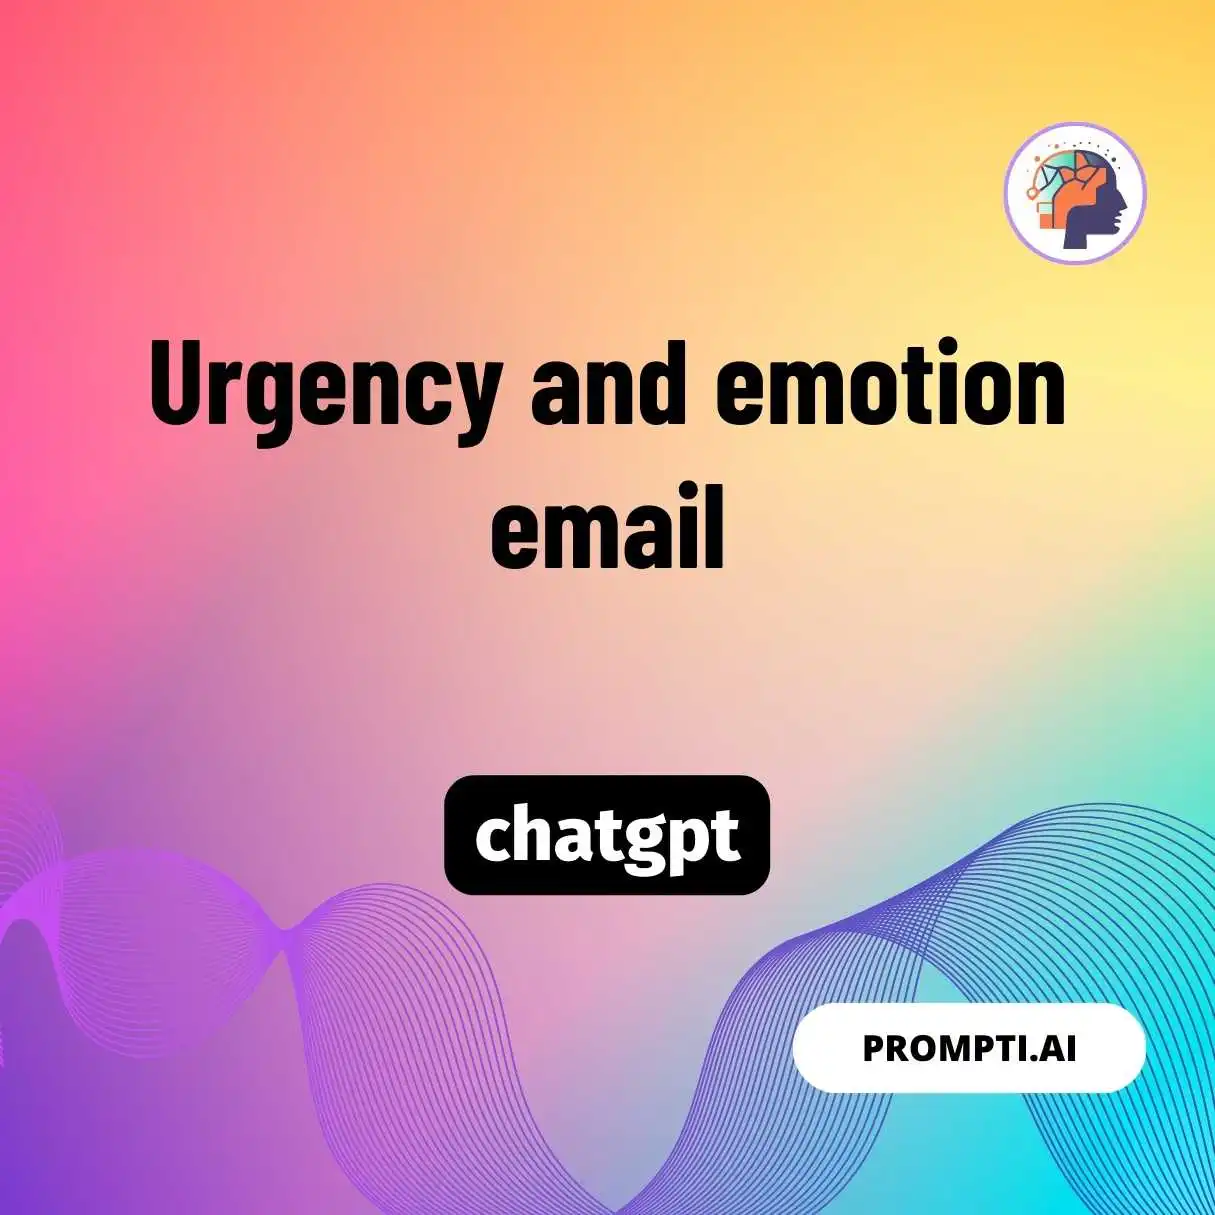 Urgency and emotion email